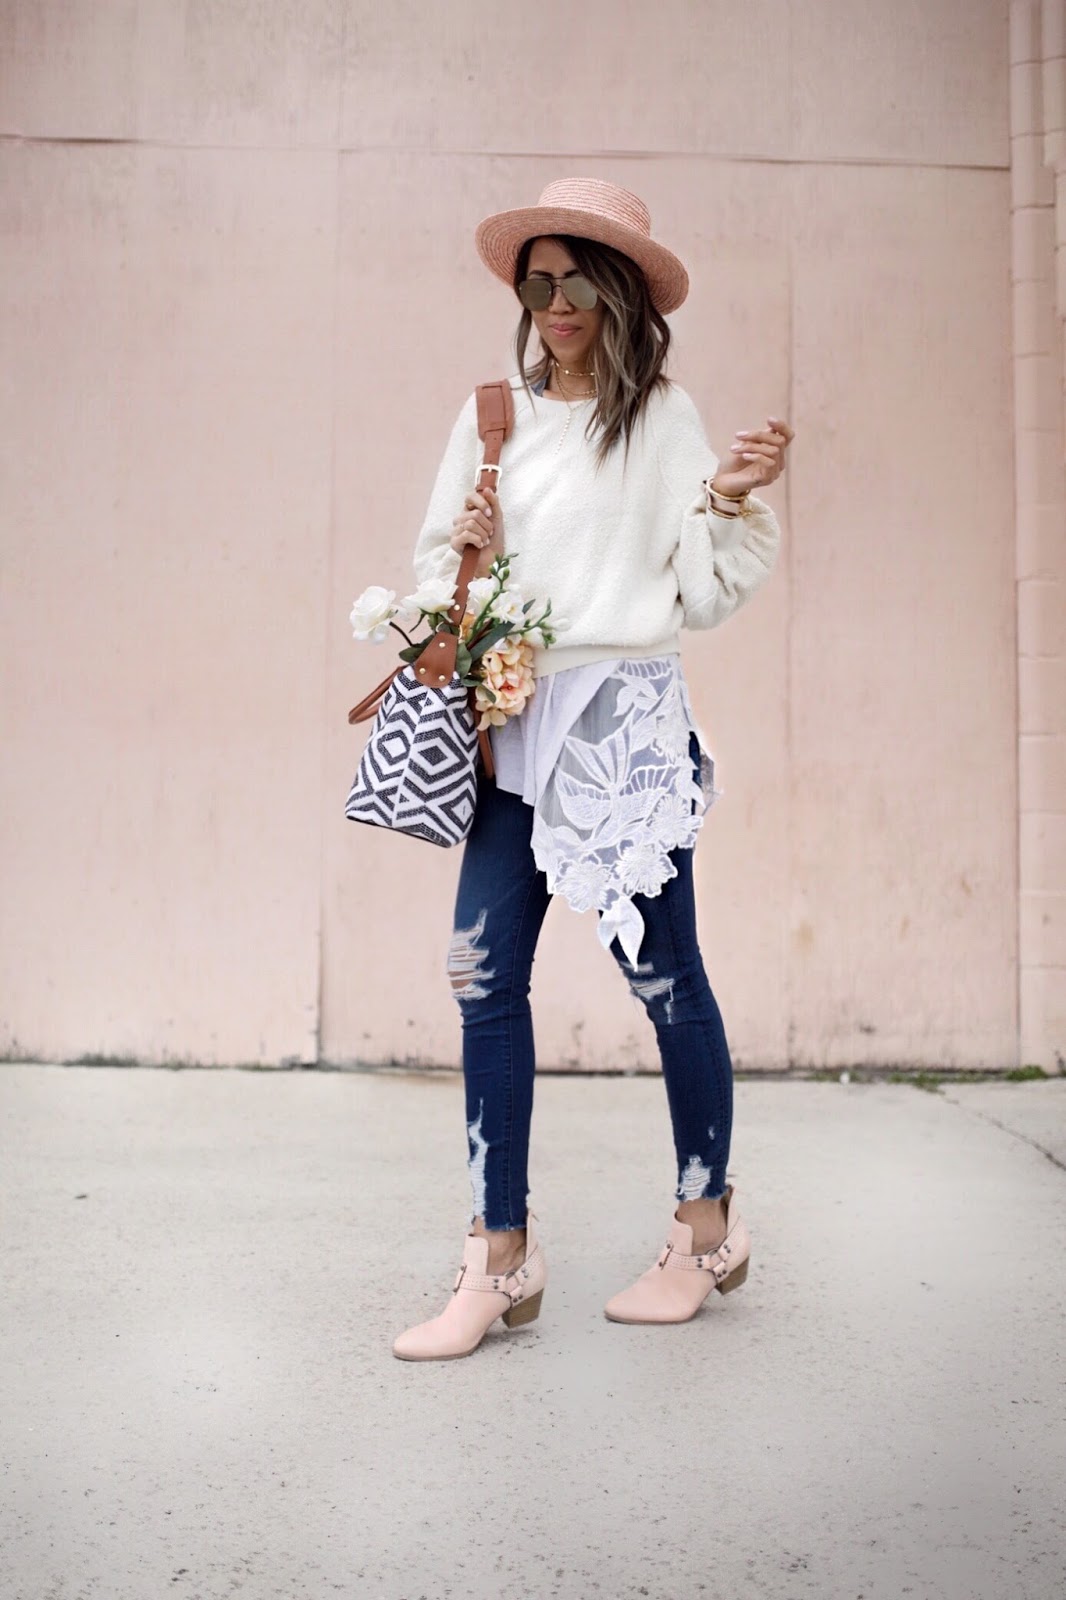 Independence medalist Retire Spring Shoes Must Have + Spring Outfits | Gypsy Tan